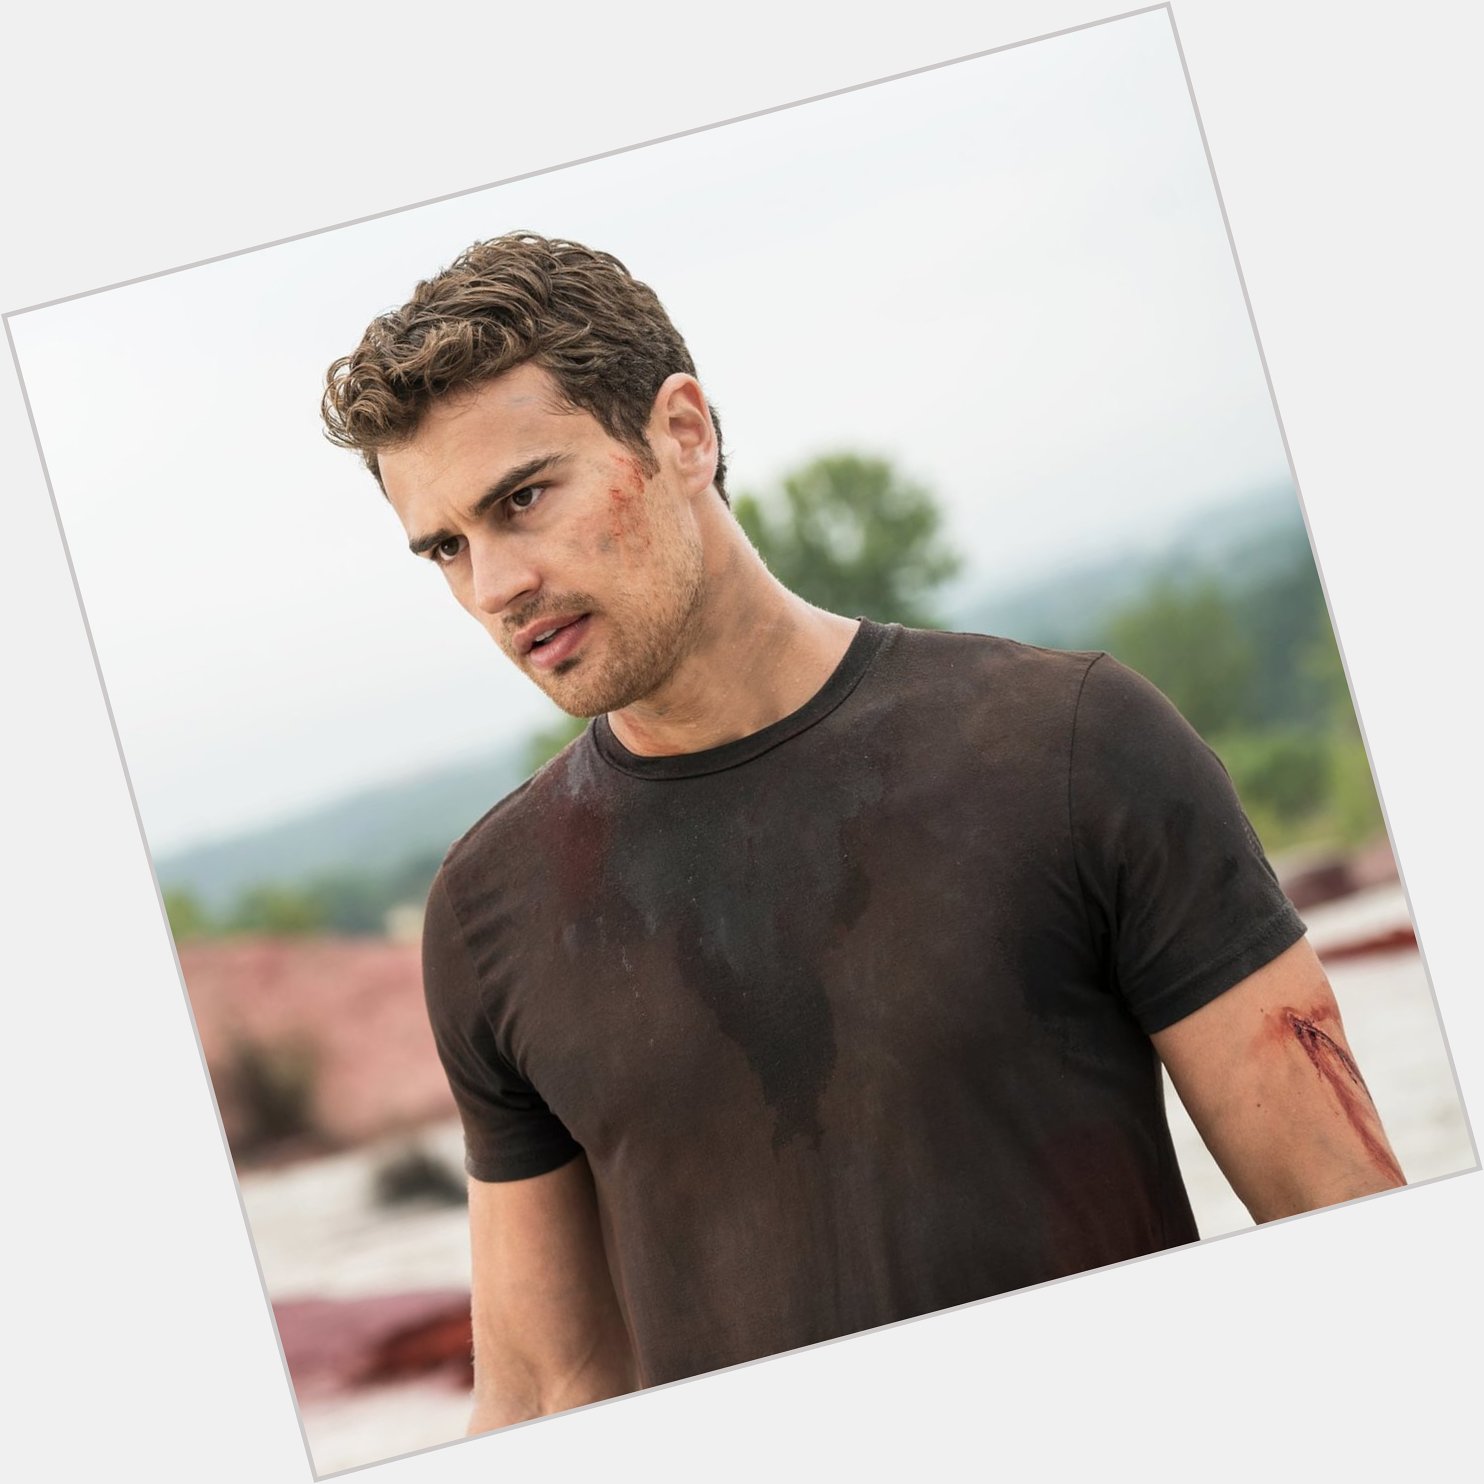 Happy Birthday to our four-ever true love, Theo James!  